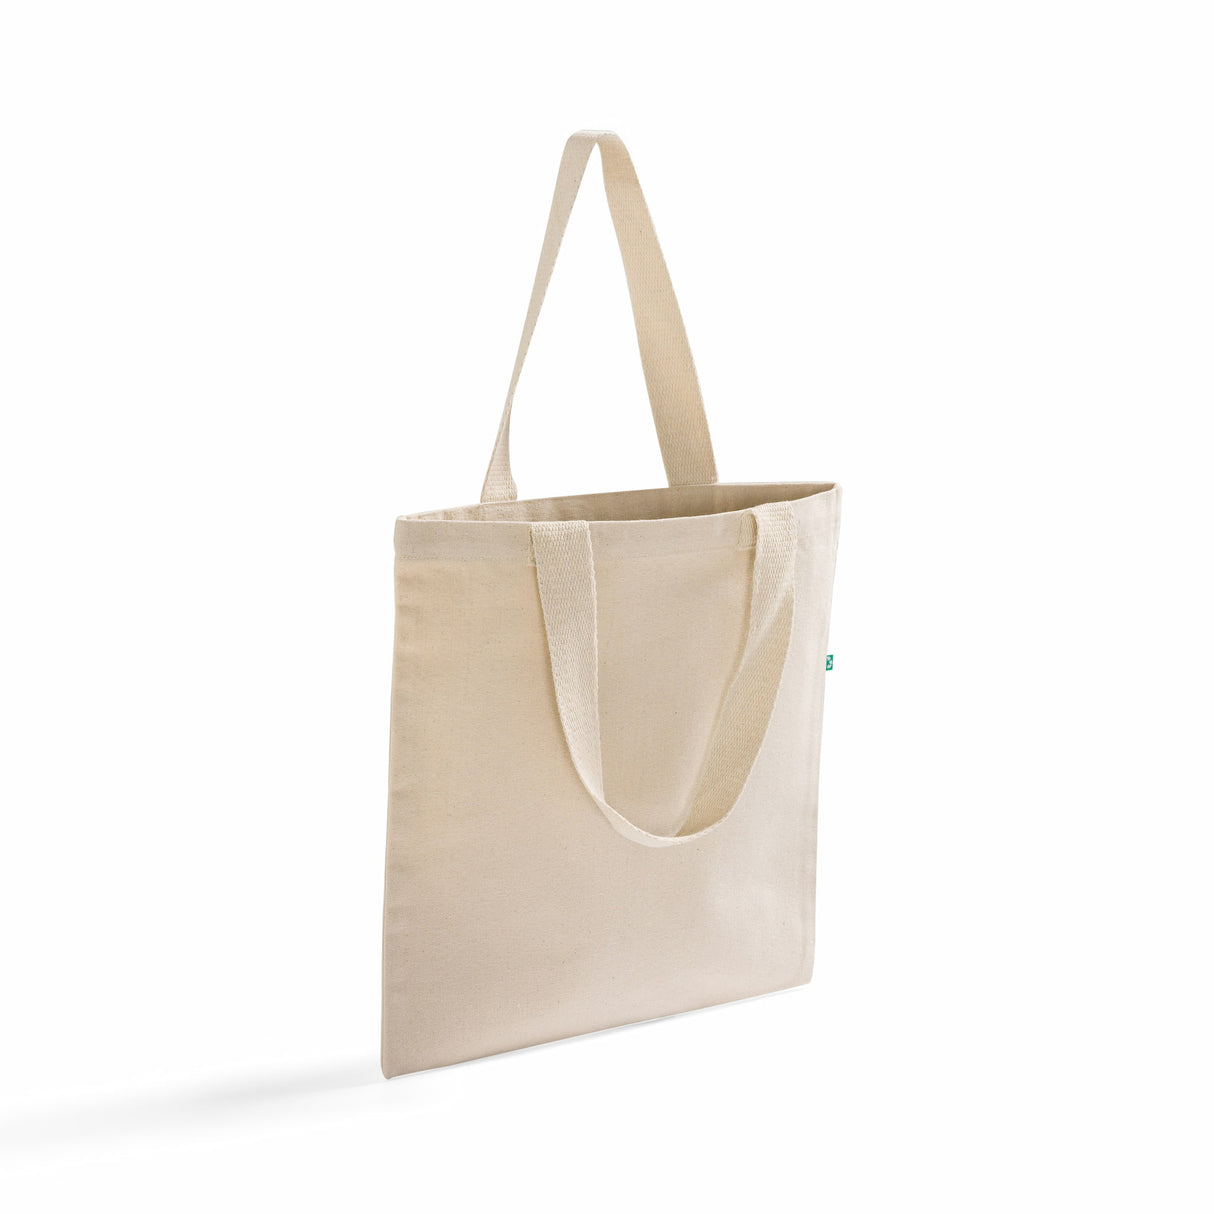 Recycled Canvas Flat Tote Bag / Basic Book Bag - RC869